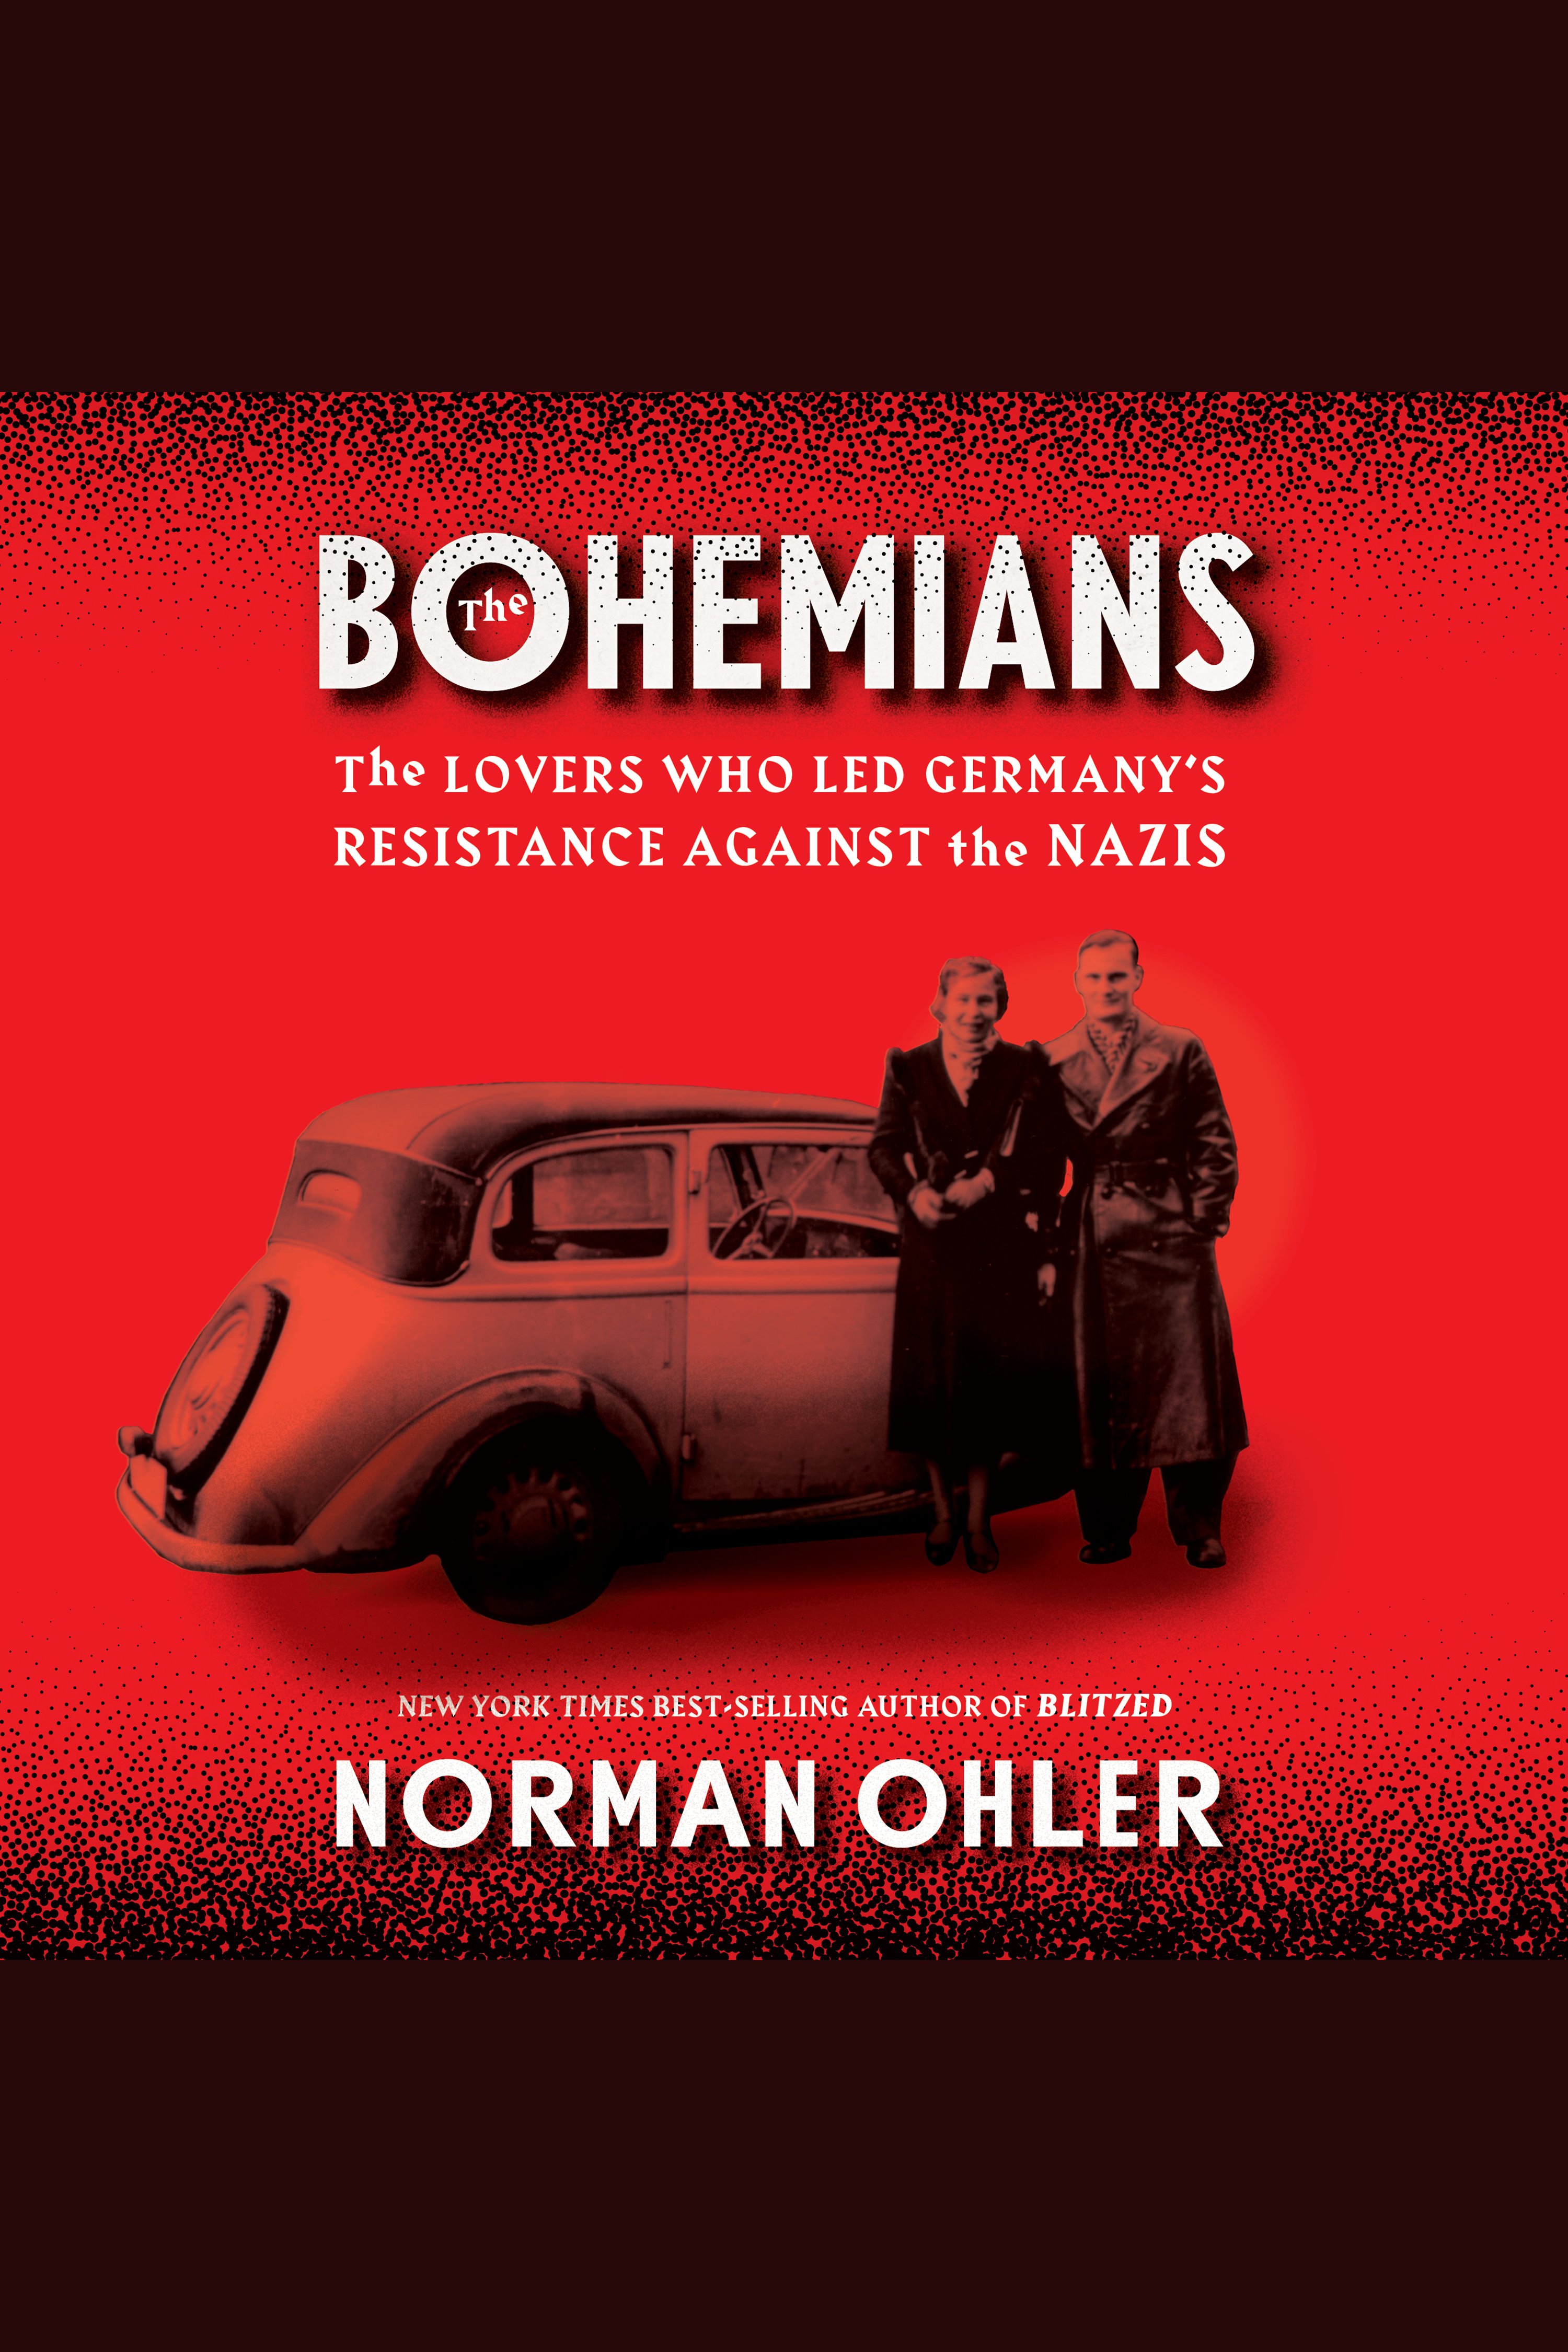 The Bohemians the lovers who led Germany's resistance against the Nazis cover image